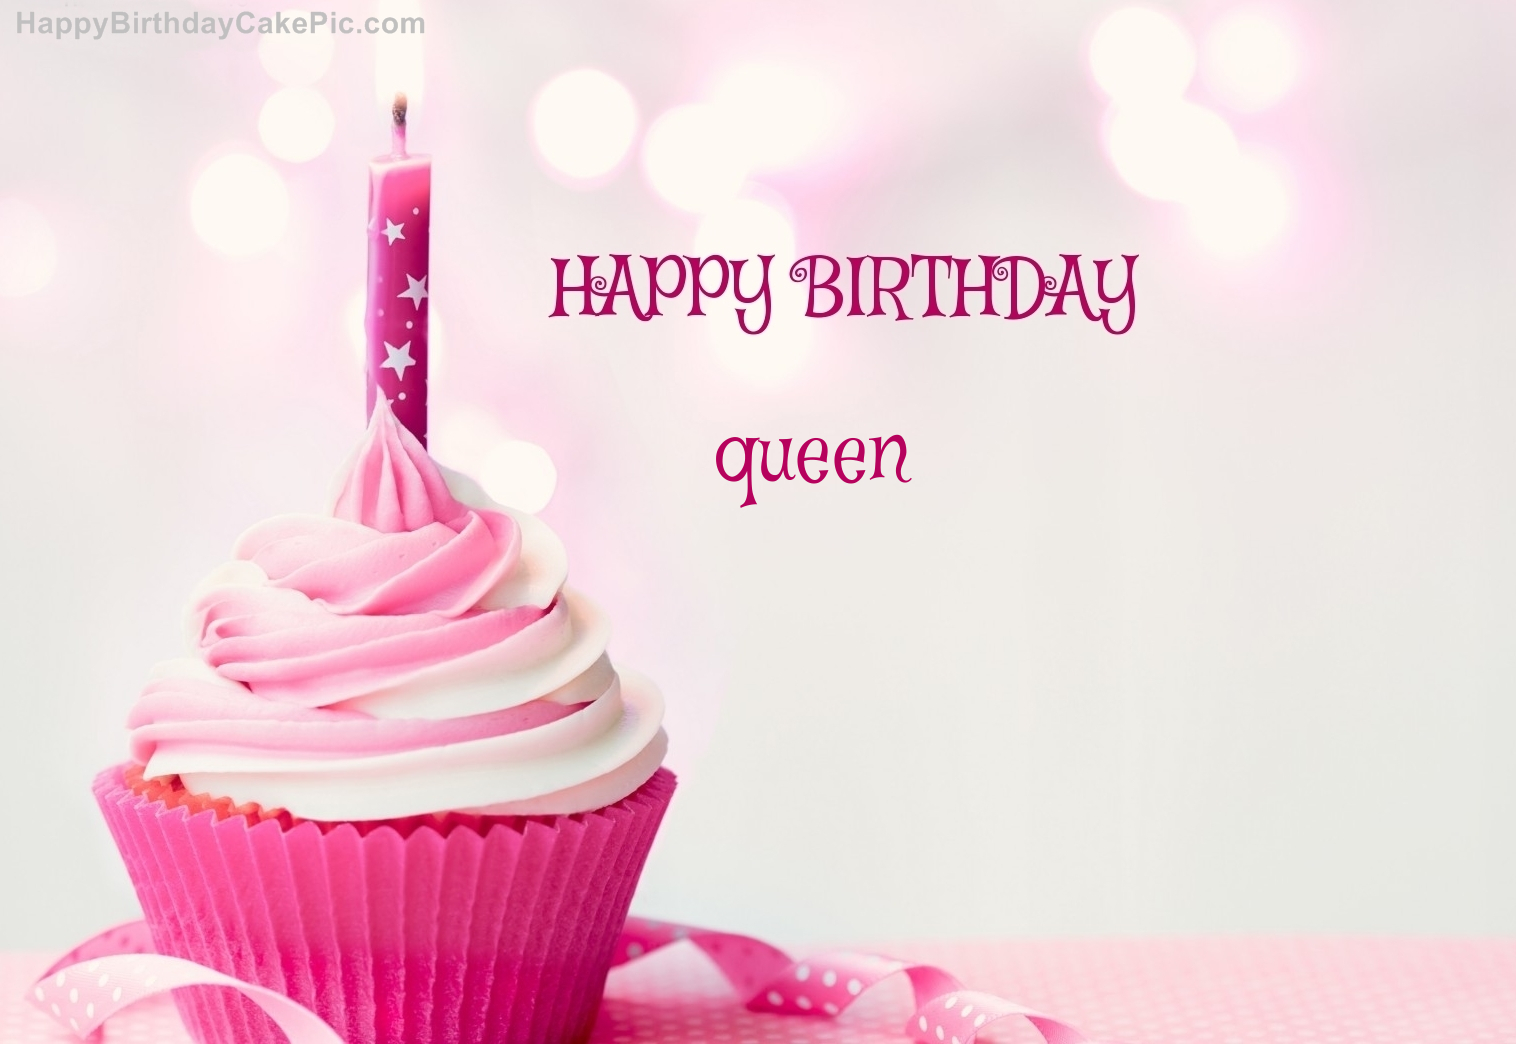 http://happybirthdaycakepic.com/pic-preview/queen/7/happy-birthday-cupcake-candle-pink-picture-for-queen.jpg